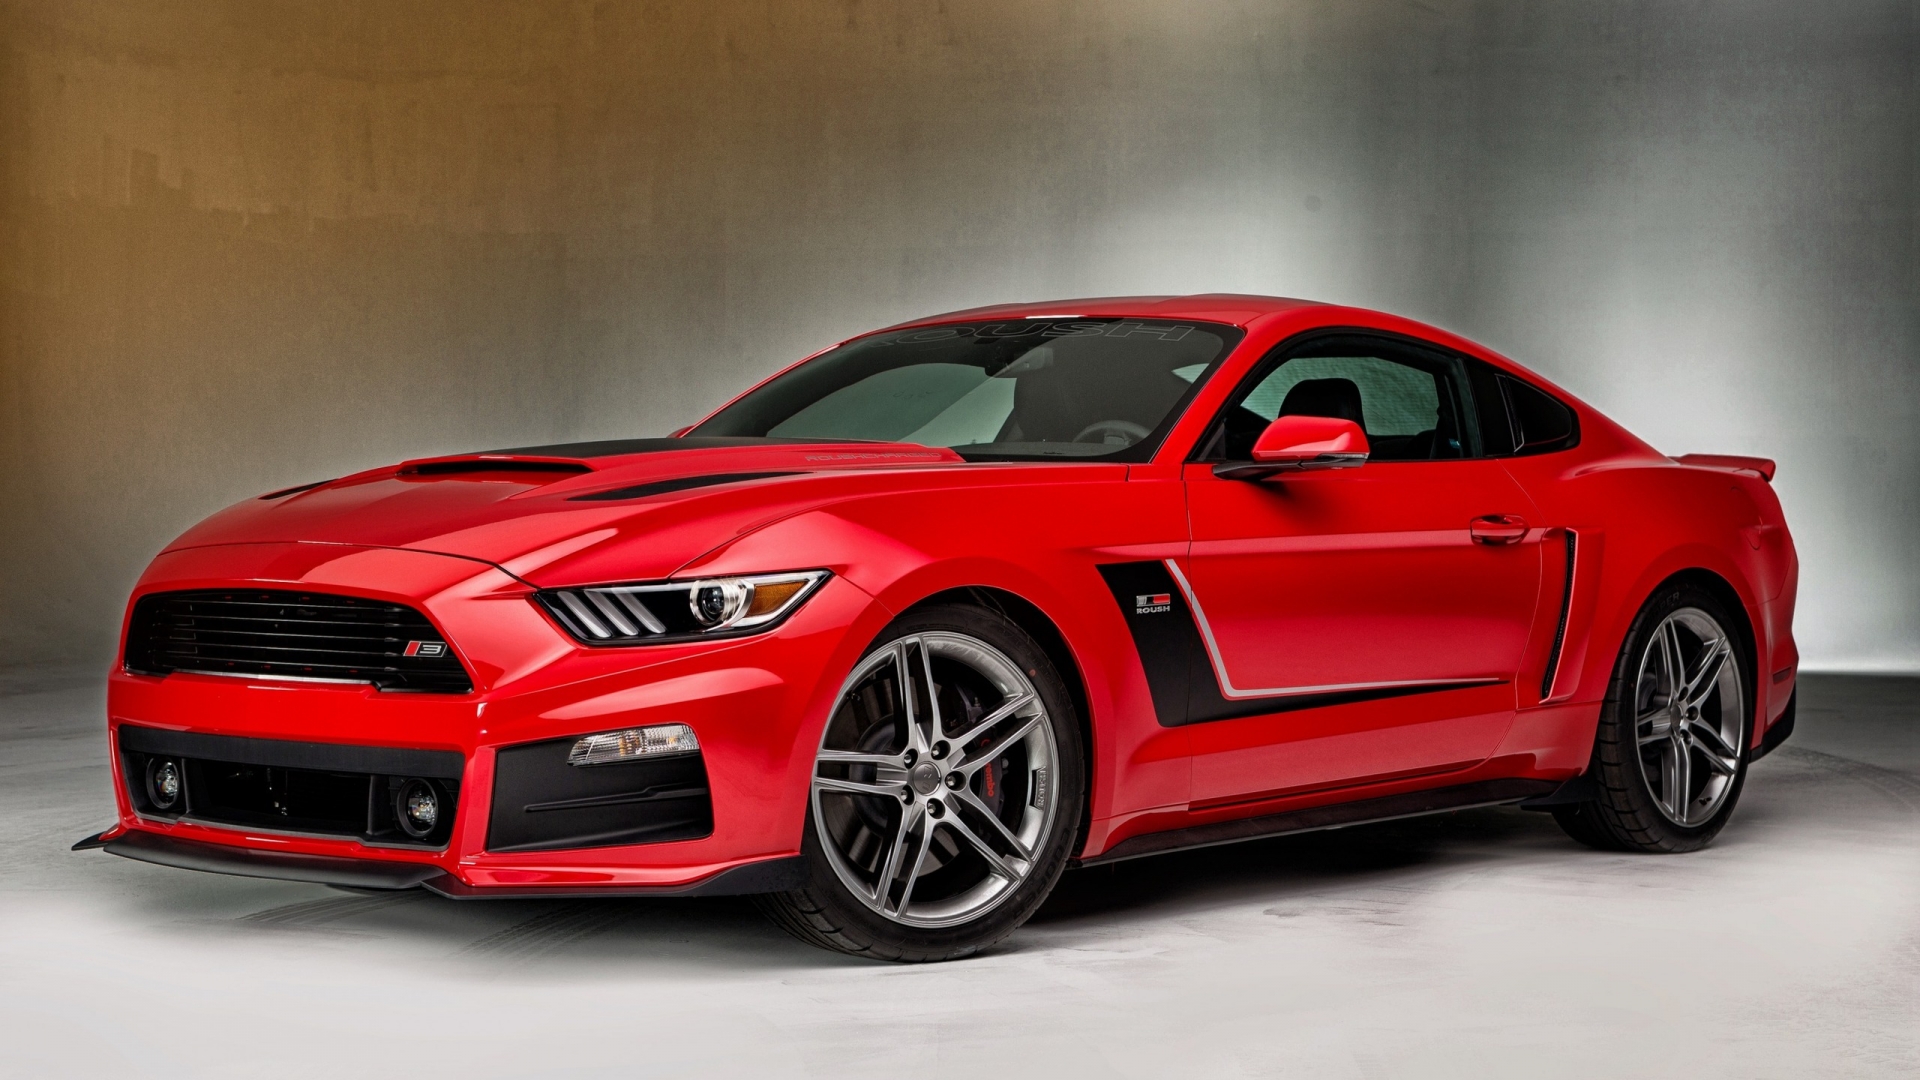 Gourgeous Red Ford Mustang for 1920 x 1080 HDTV 1080p resolution